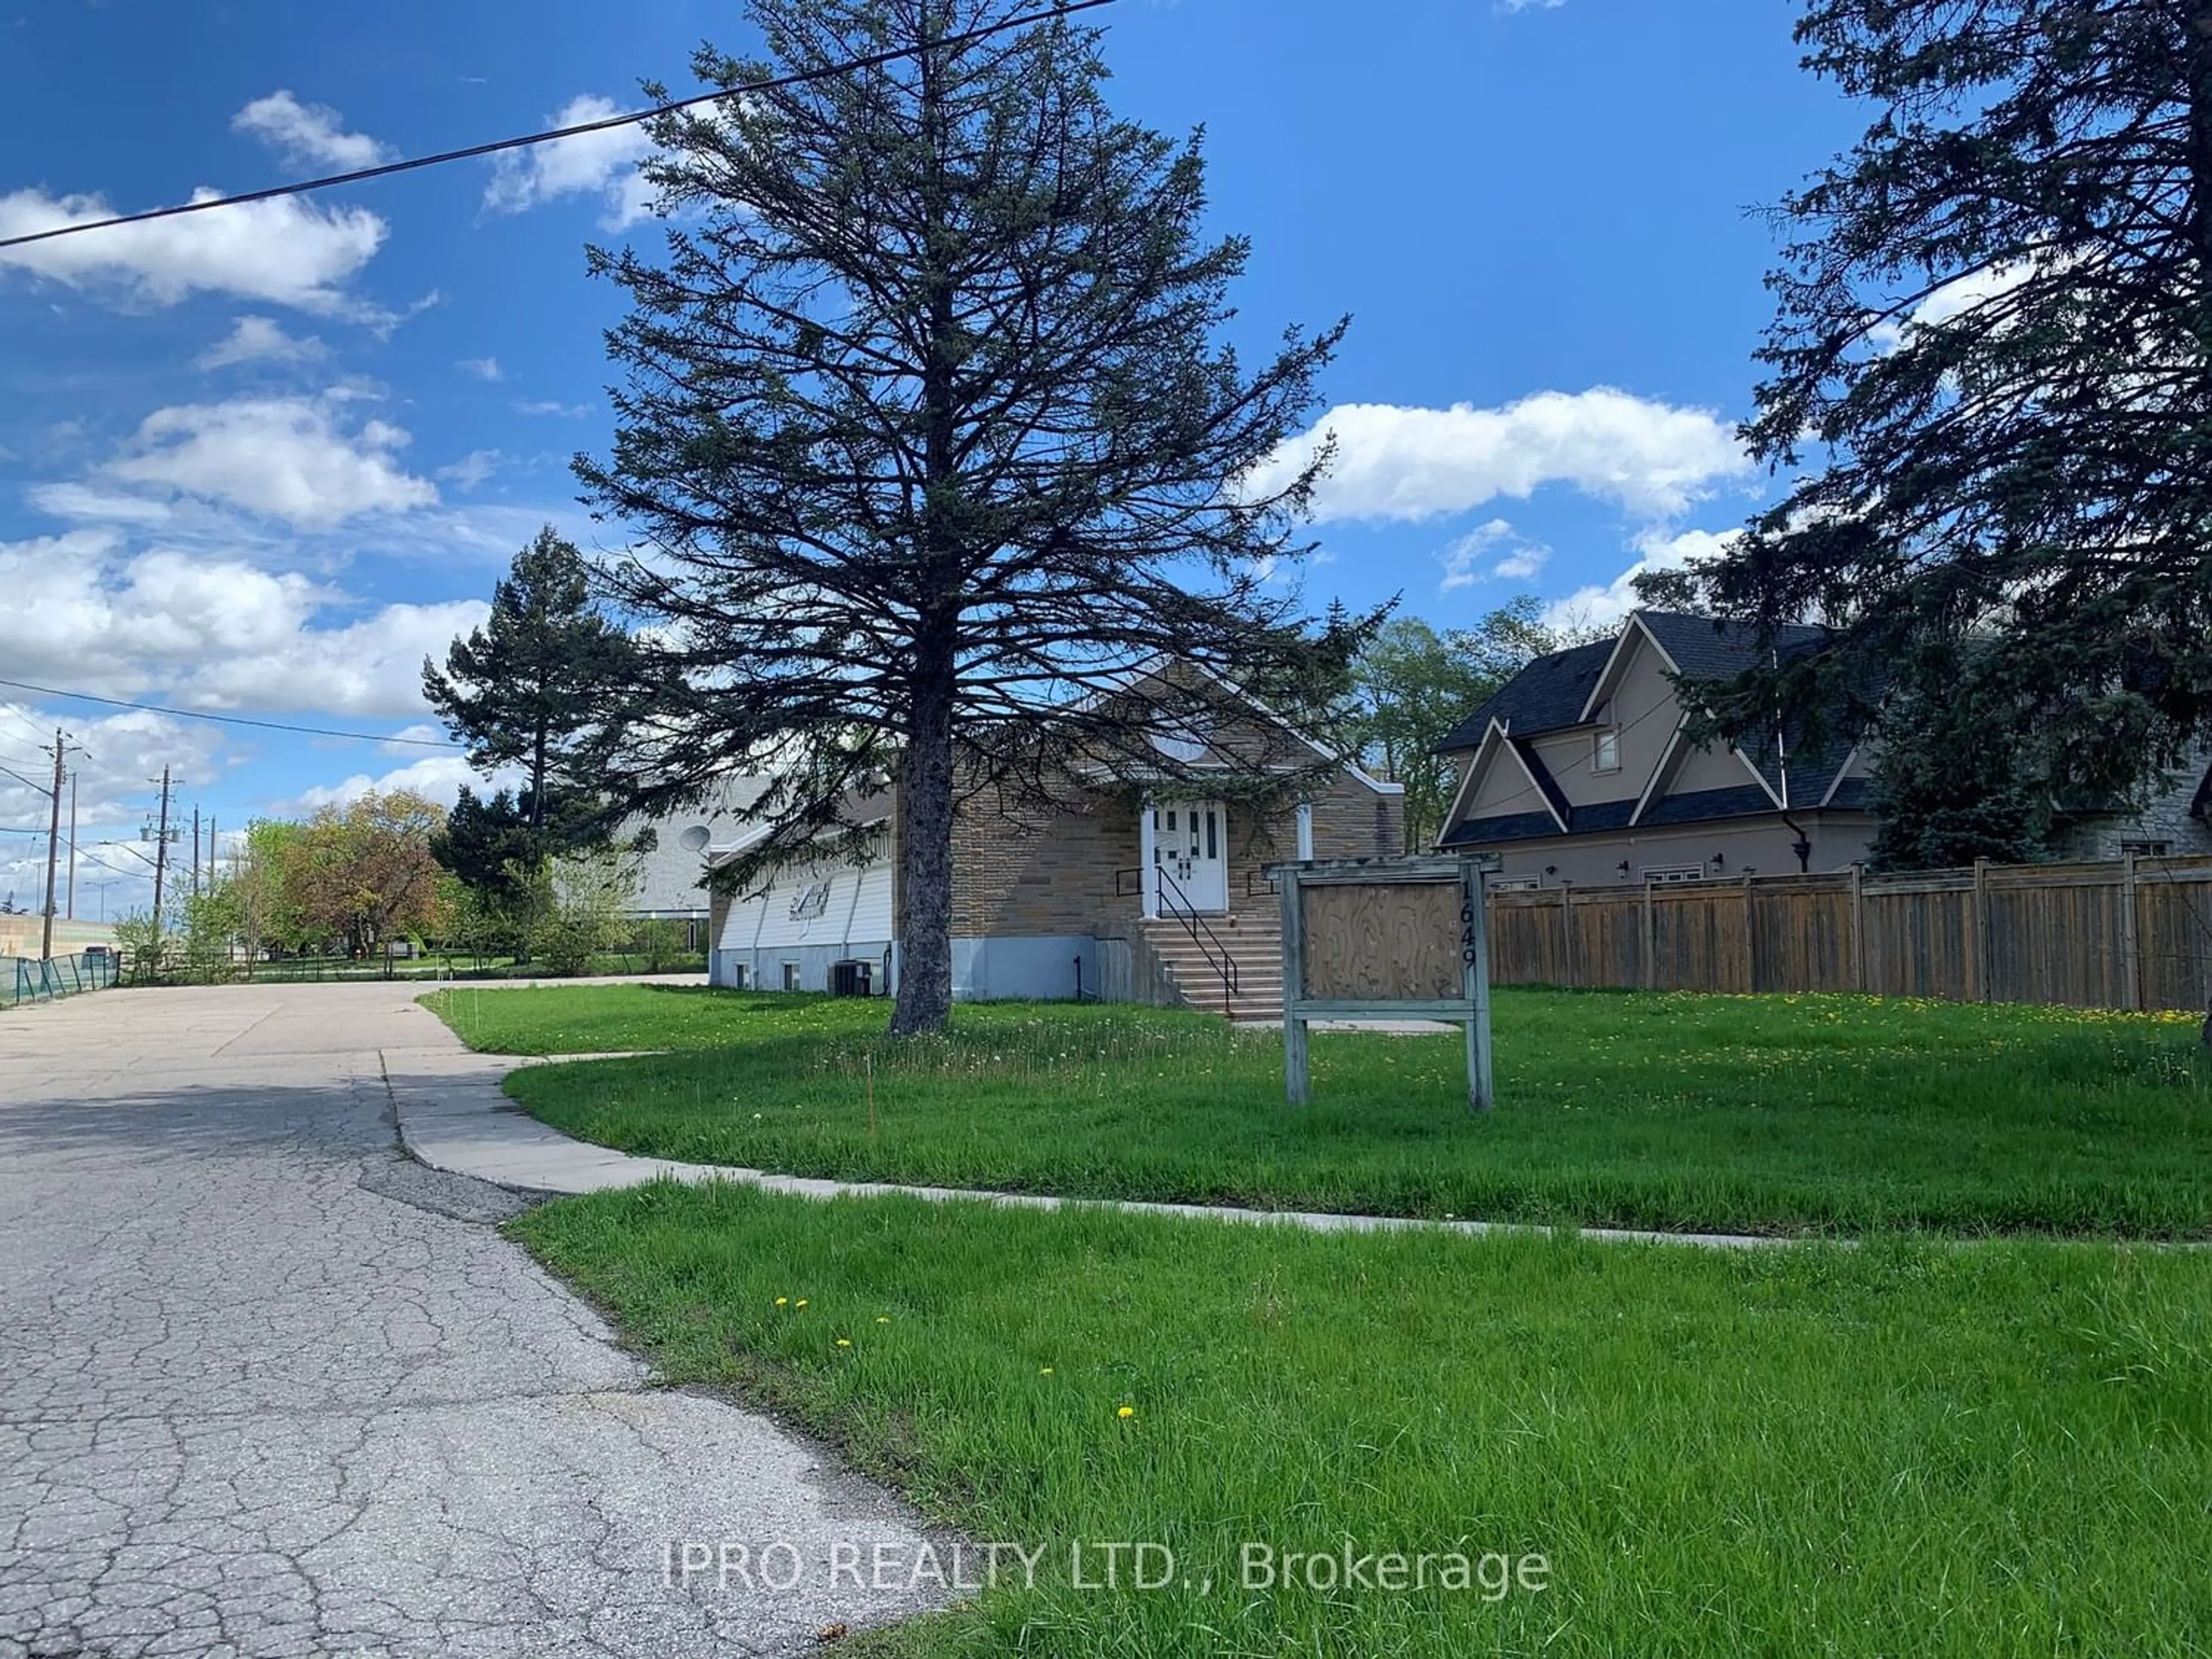 Frontside or backside of a home for 1649 Crediton Pkwy, Mississauga Ontario L5G 3X2